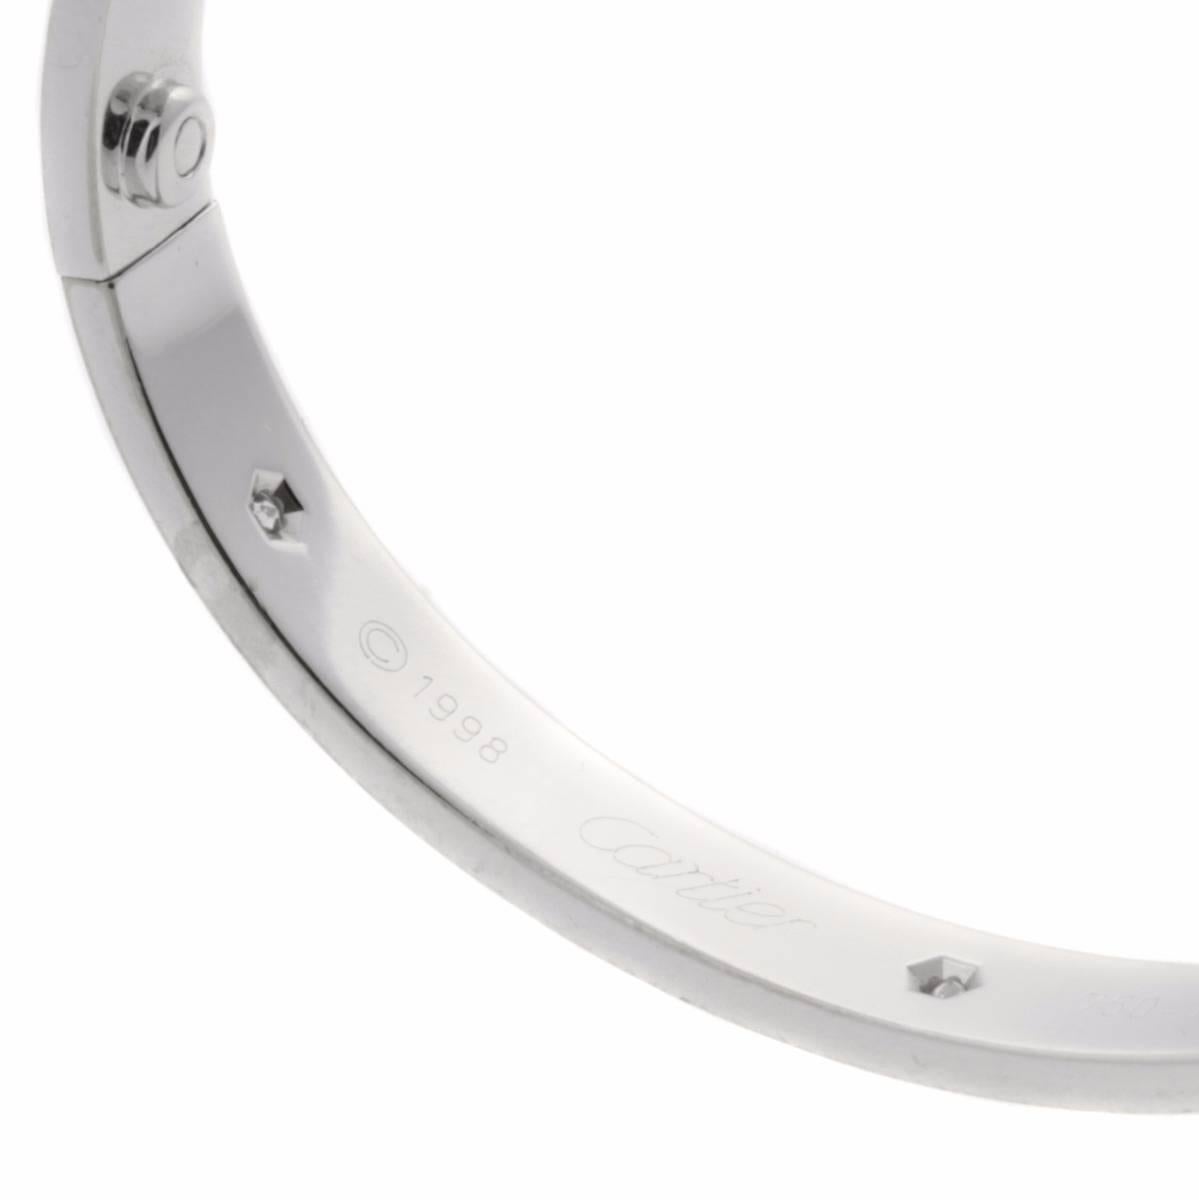 A magnificent authentic Cartier love bangle featuring 6 of the finest Cartier round brilliant cut diamonds (.60ct) set in 18k white gold.

Cartier Retail: 13,200 + Tax